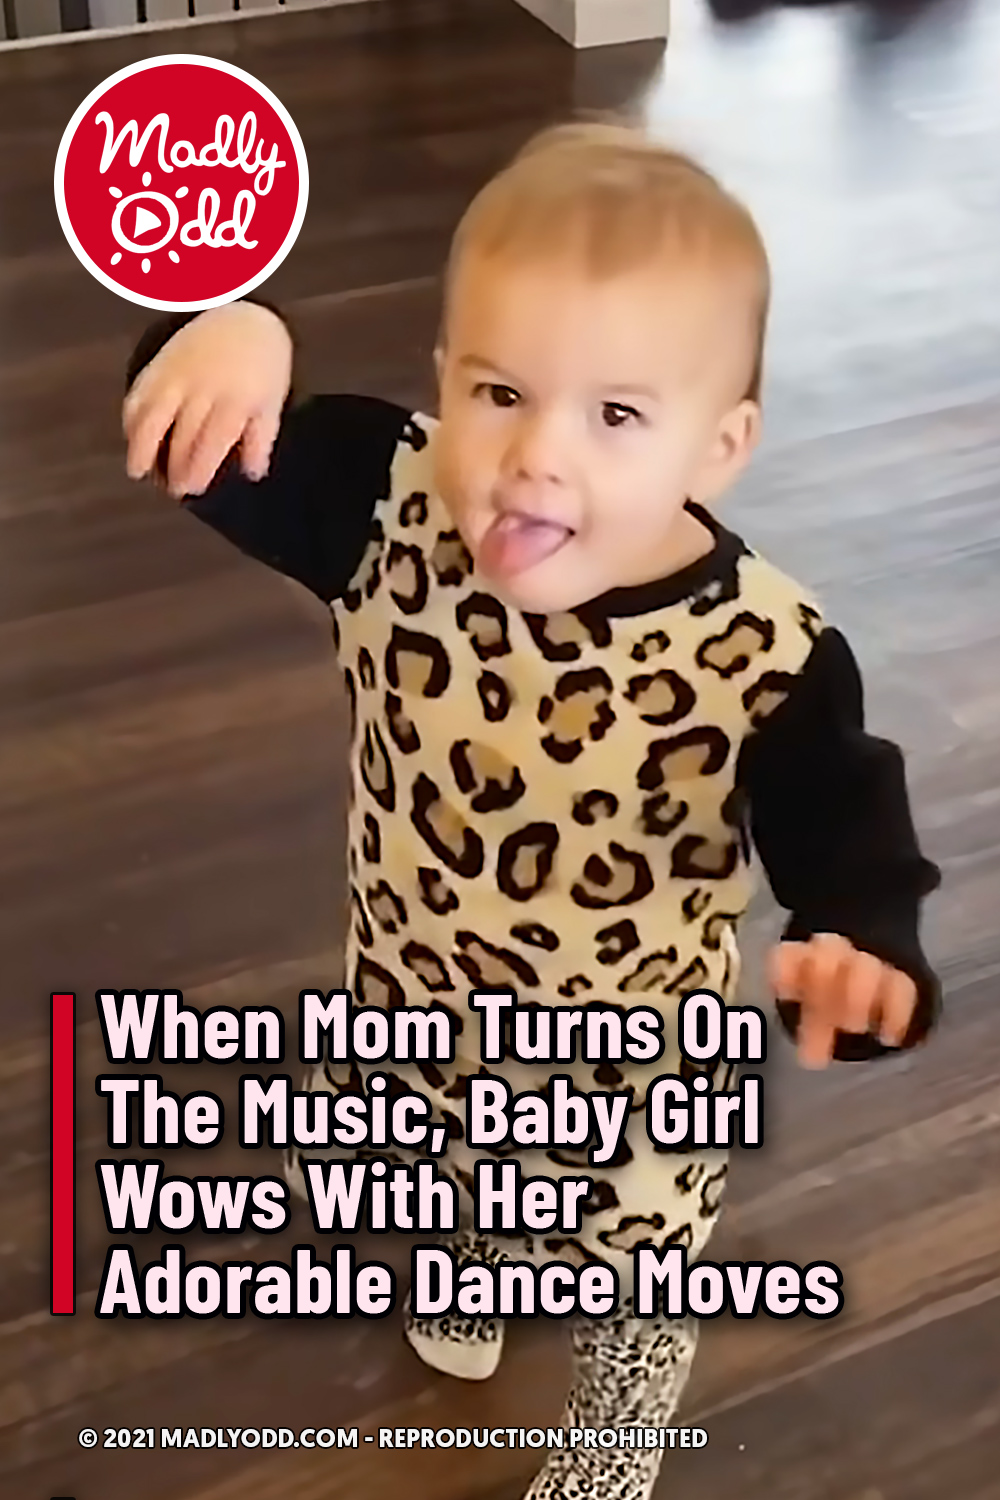 When Mom Turns On The Music, Baby Girl Wows With Her Adorable Dance Moves